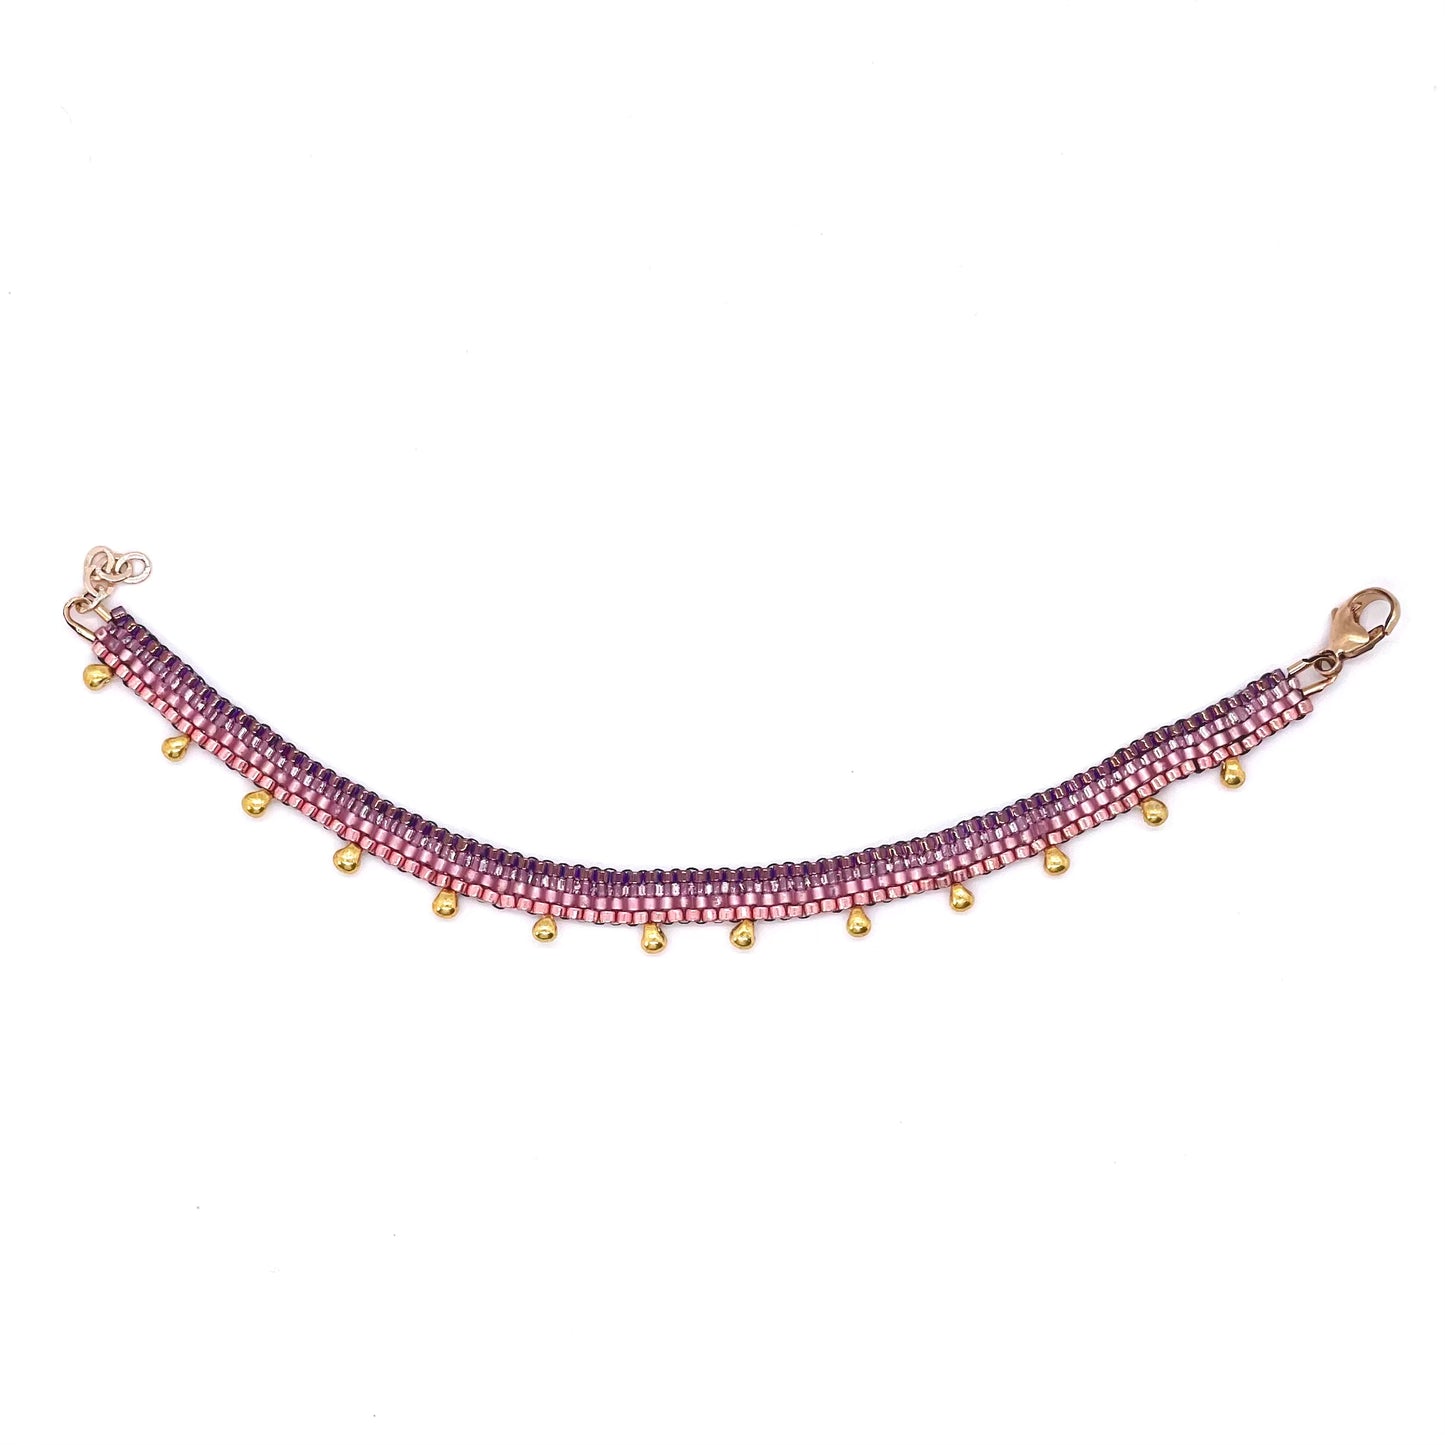 Pink beaded anklet handwoven using peyote stitch. Stripes in various shades of pink seed beads and gold-tone beaded drops.